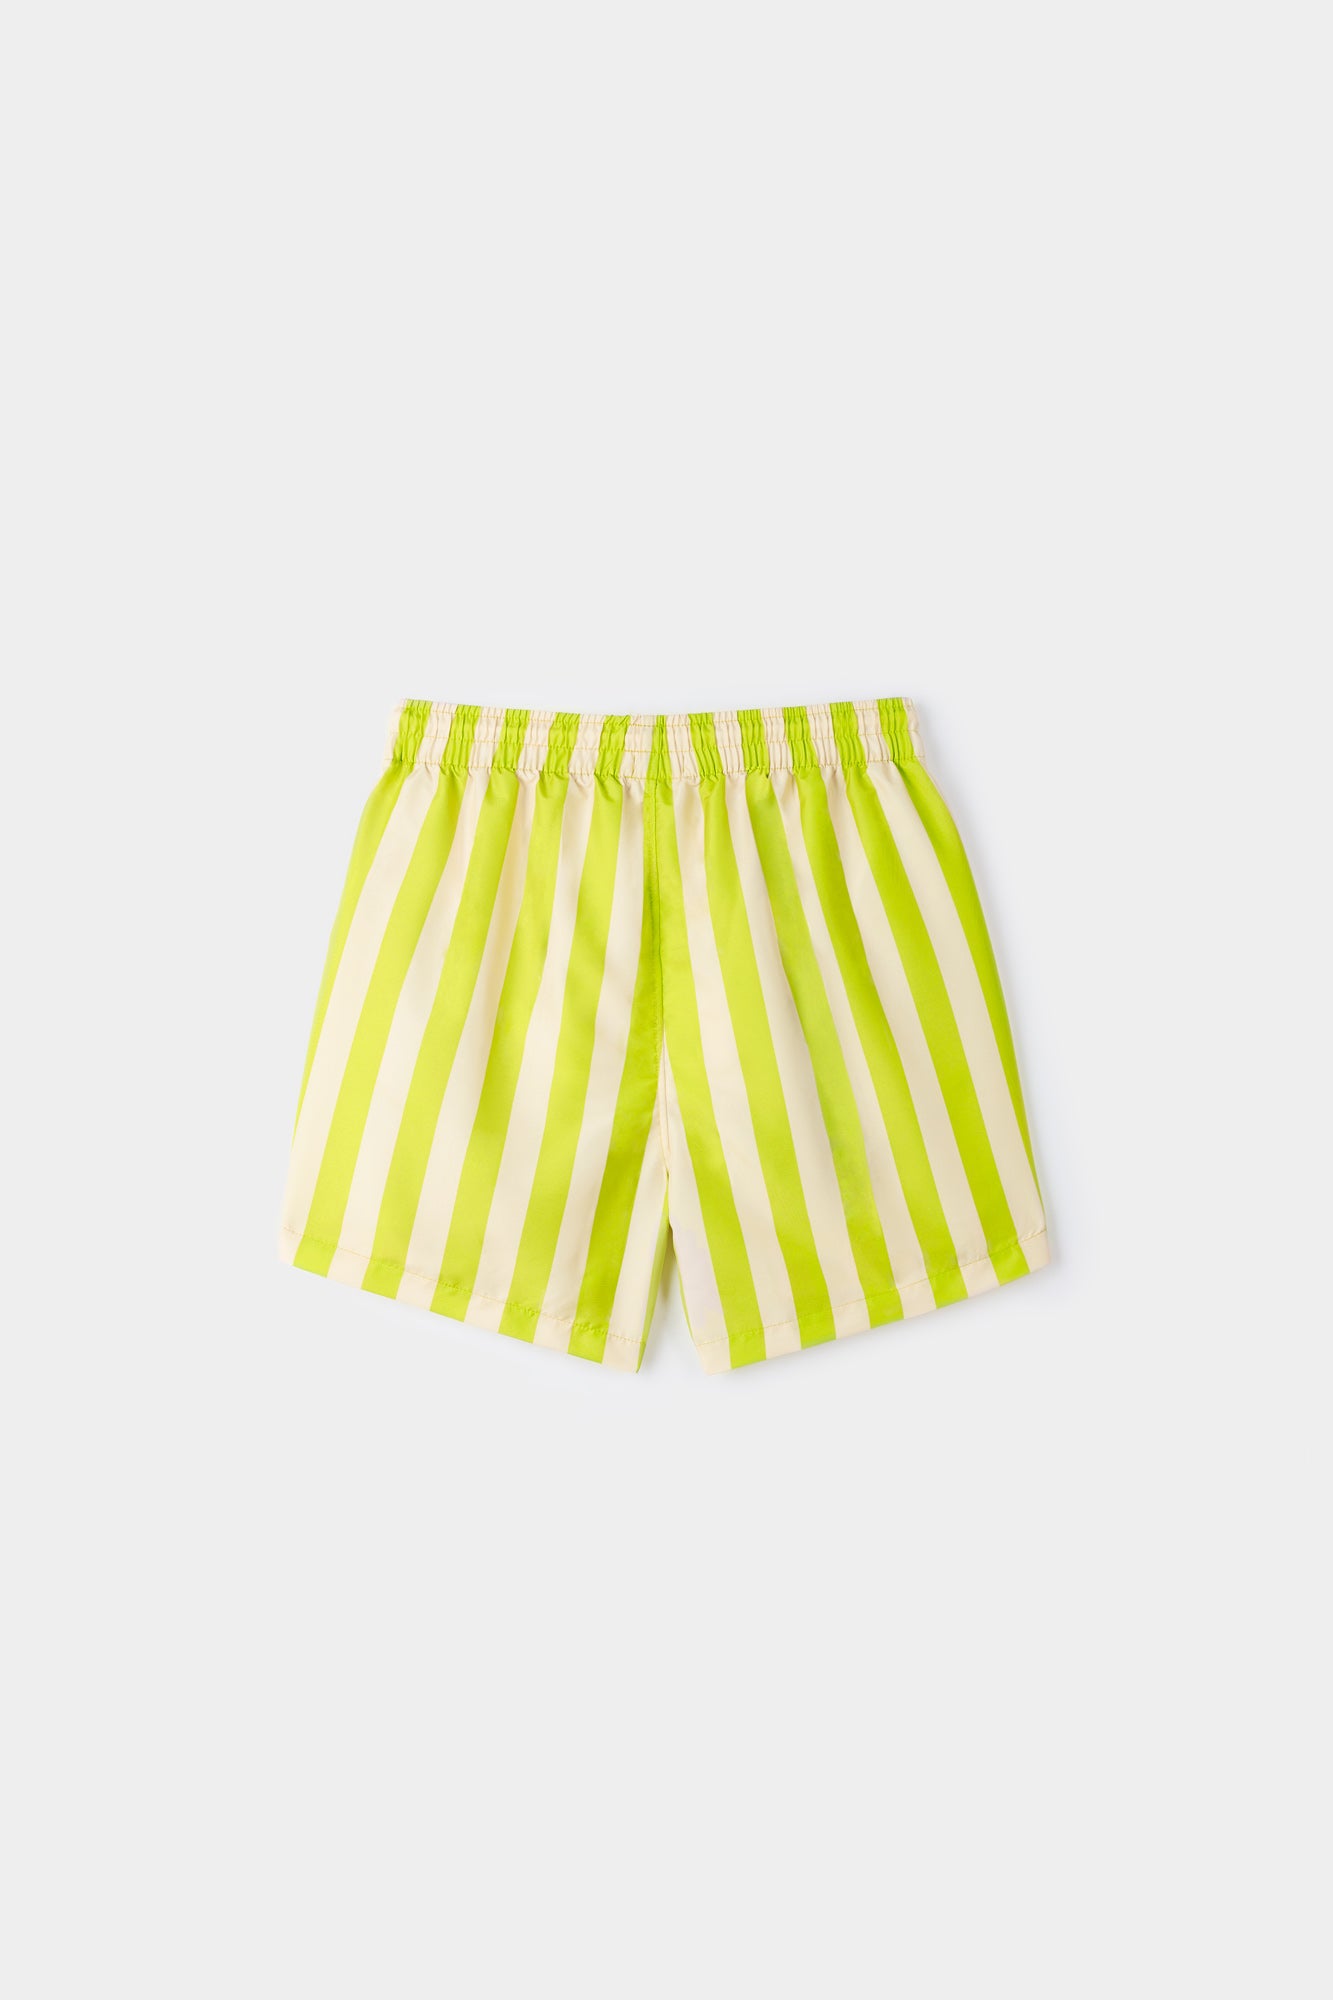 SWIMSHORTS / beige and yellow stripes